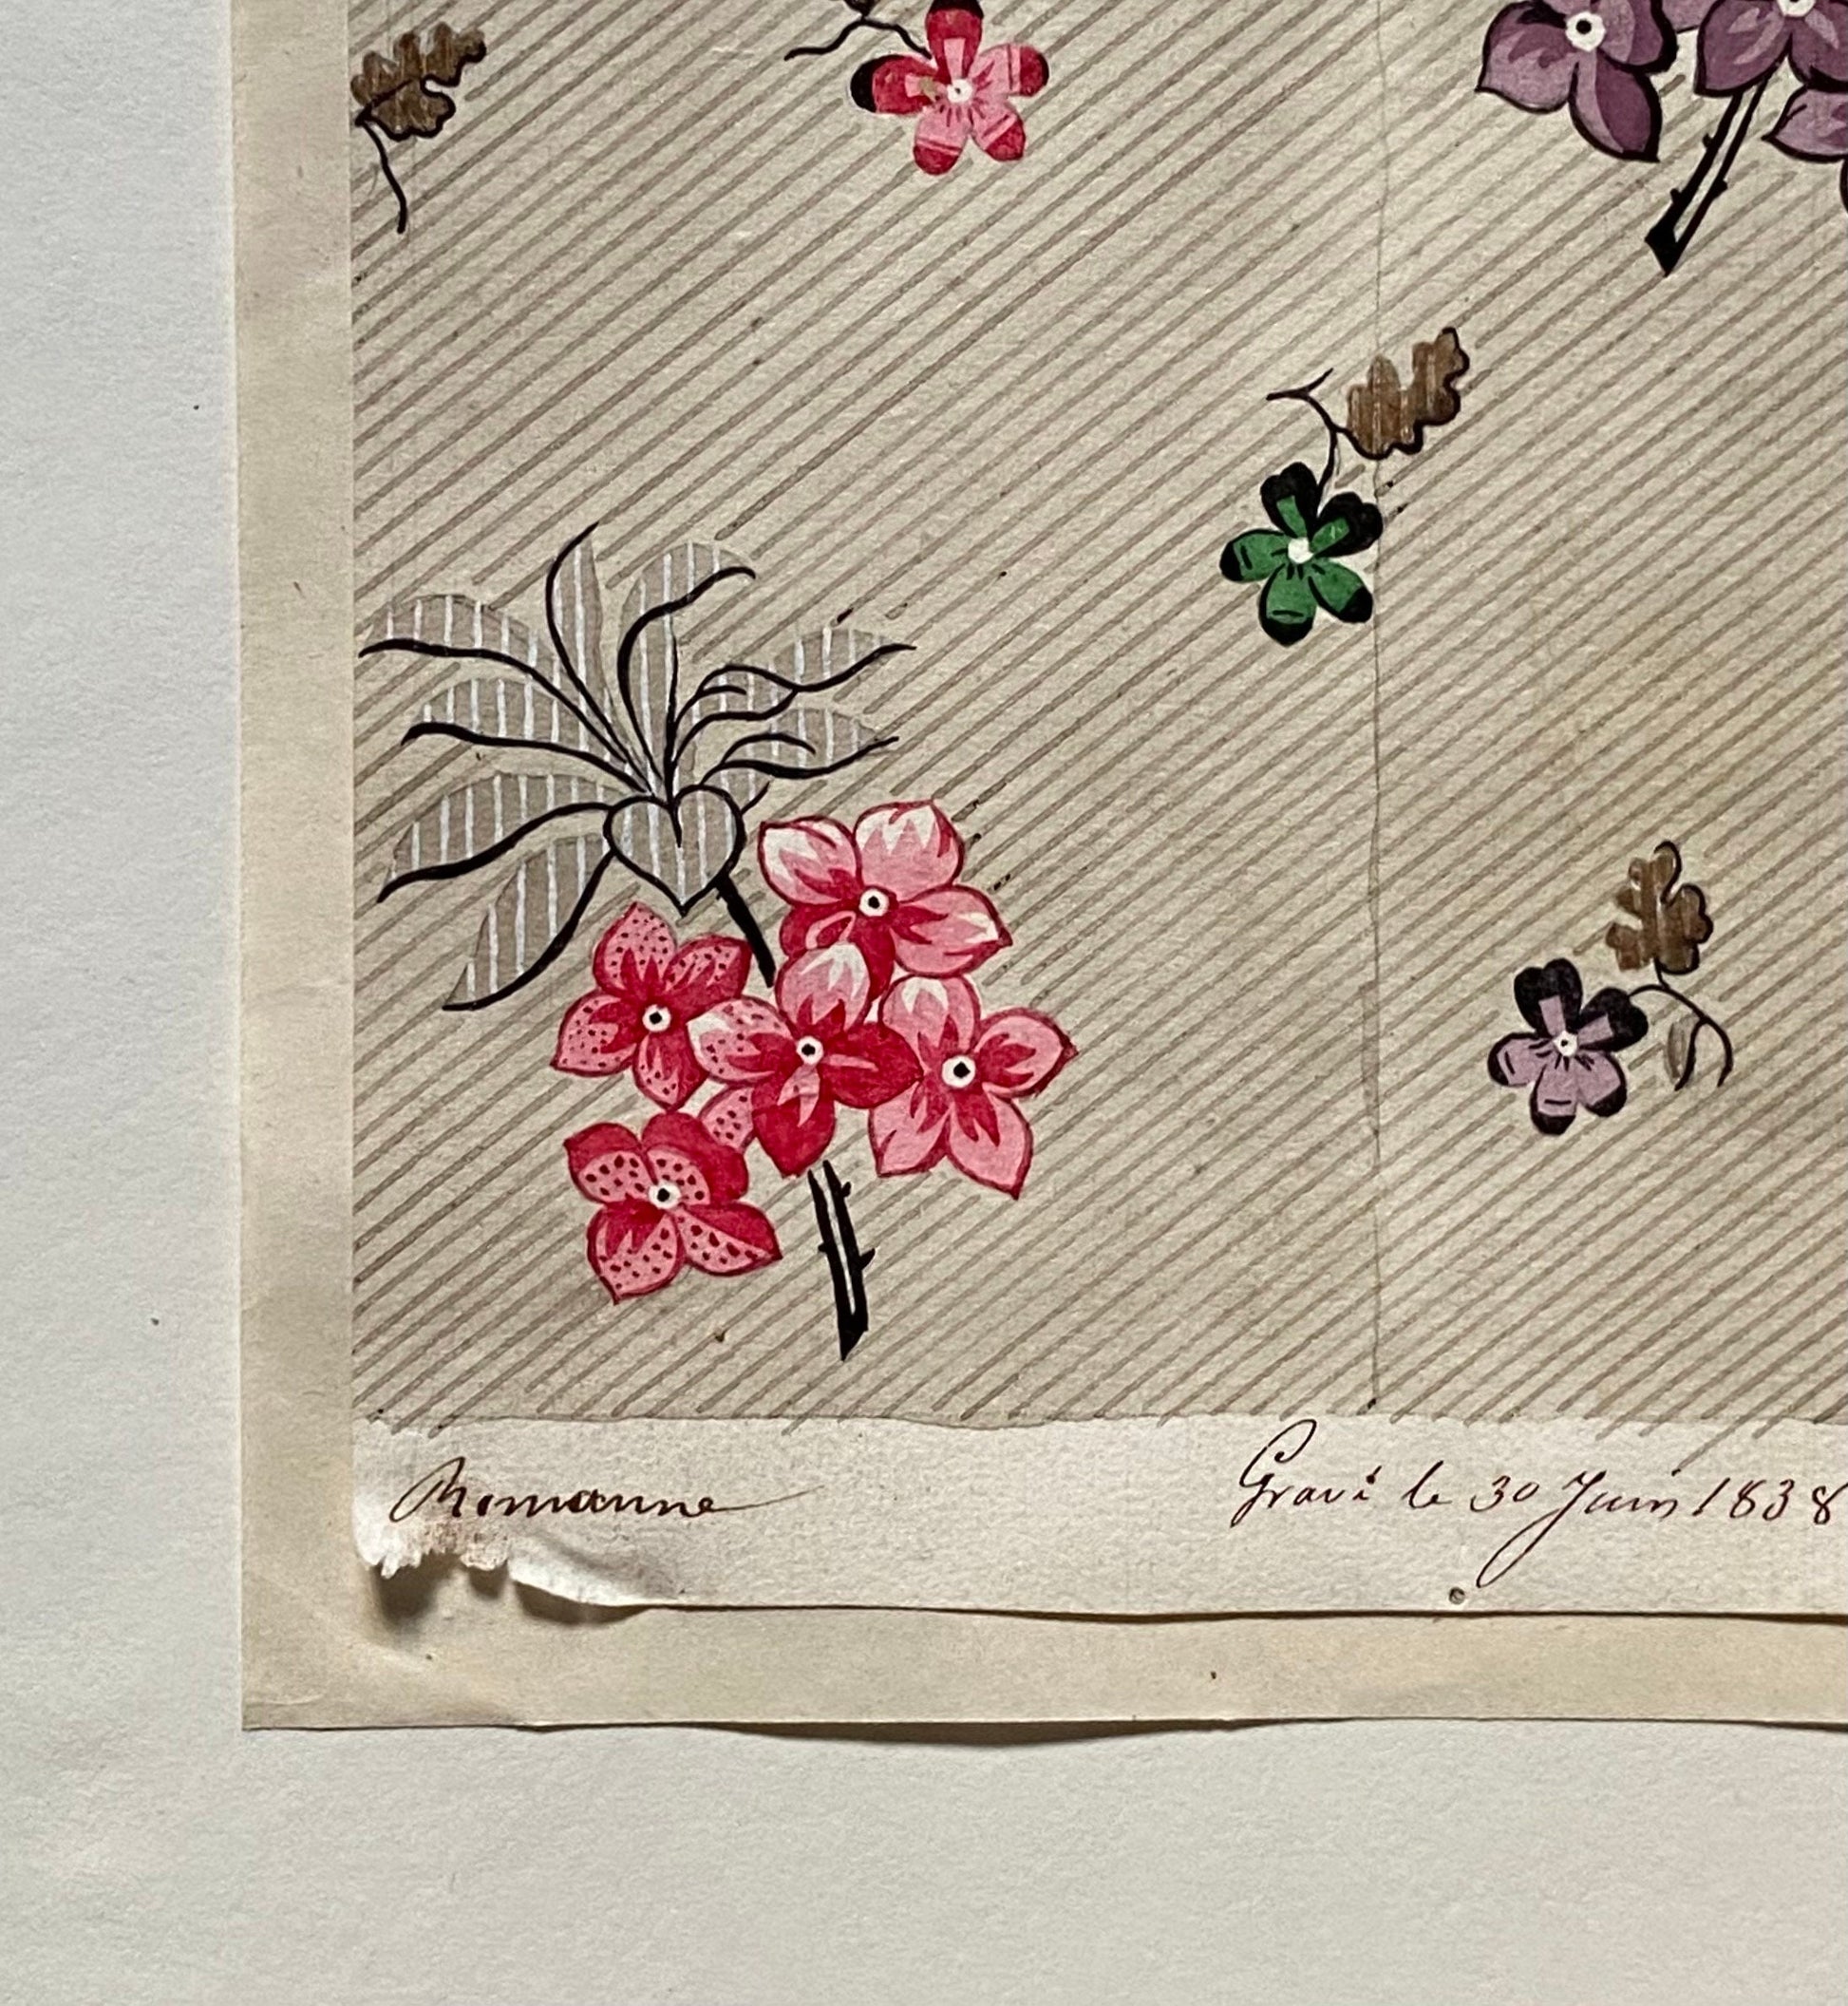 A Genuine 19th Century French Textile Design. Dated 1838. Mounted on Antique Paper. Size: 12 x 16 cm